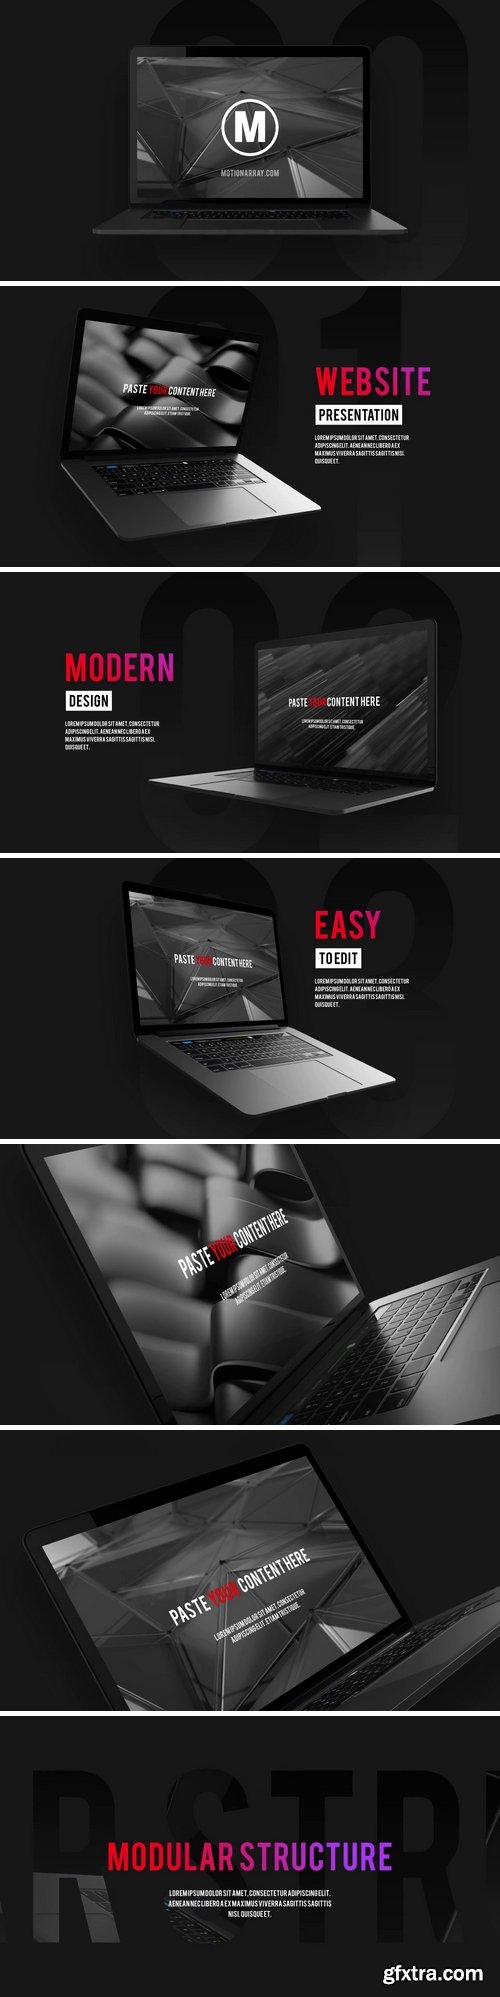 MotionArray - Stylish Website Promo After Effects Templates 85477